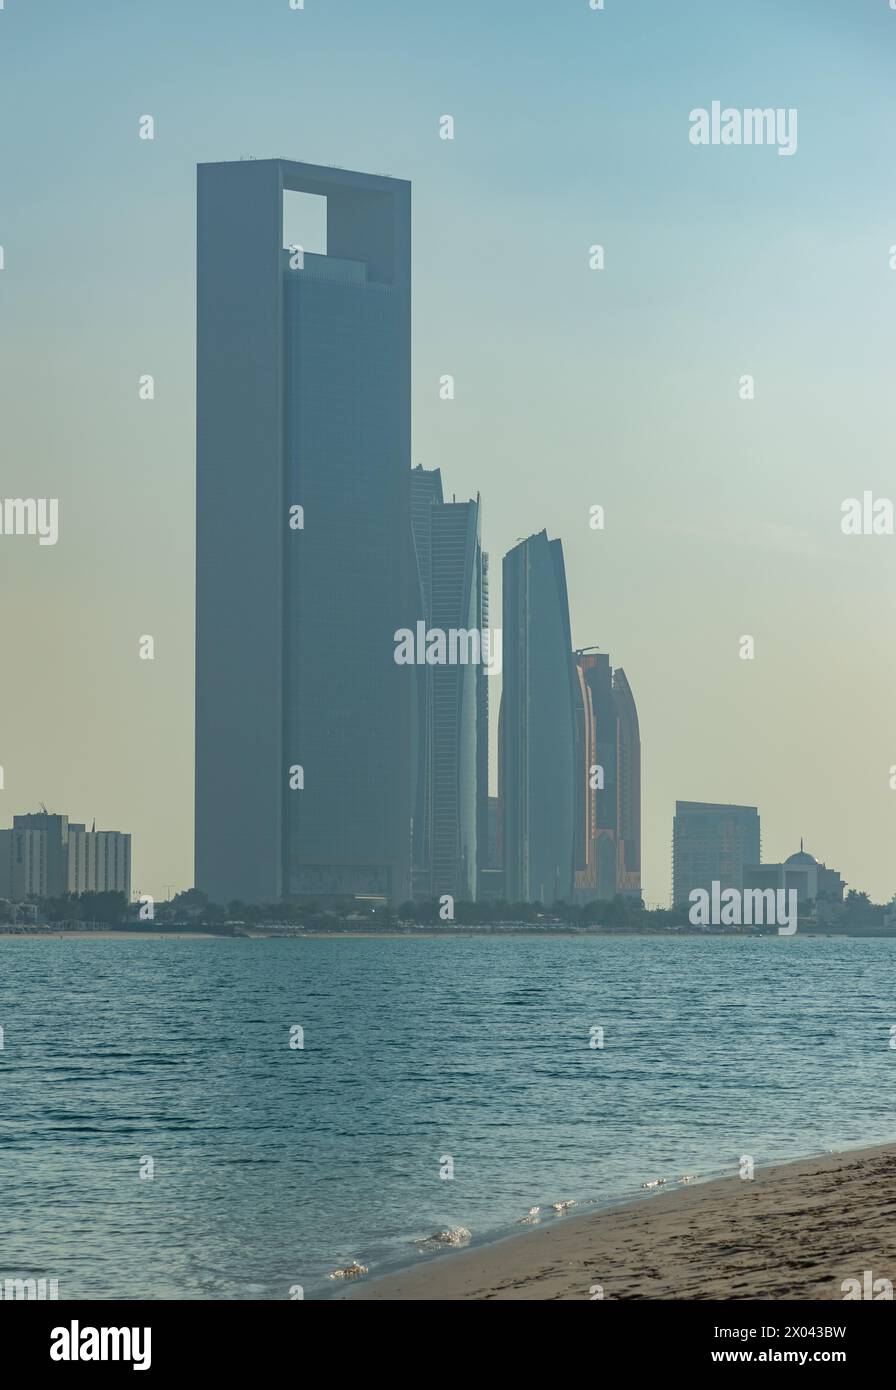 A picture of the Etihad Towers and the Abu Dhabi National Oil Company Headquarters as seen from afar. Stock Photo